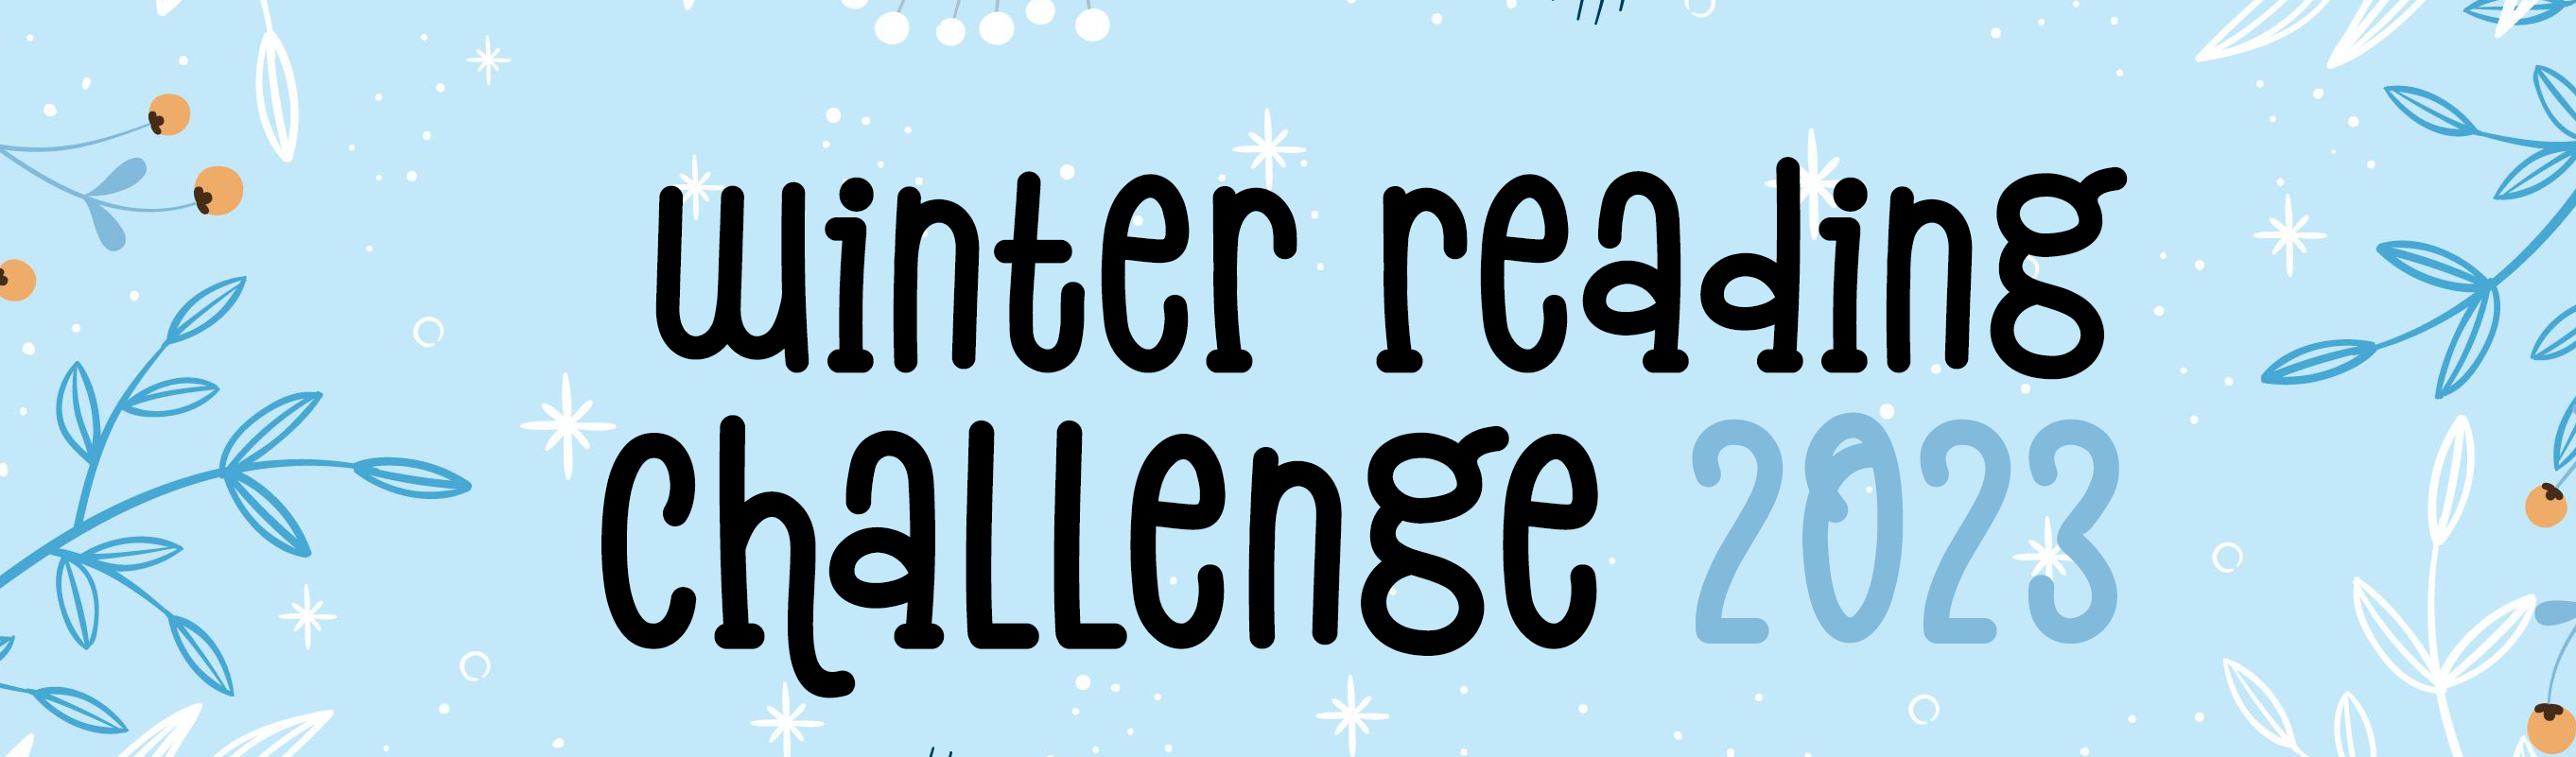 Winter Reading Challenge ends